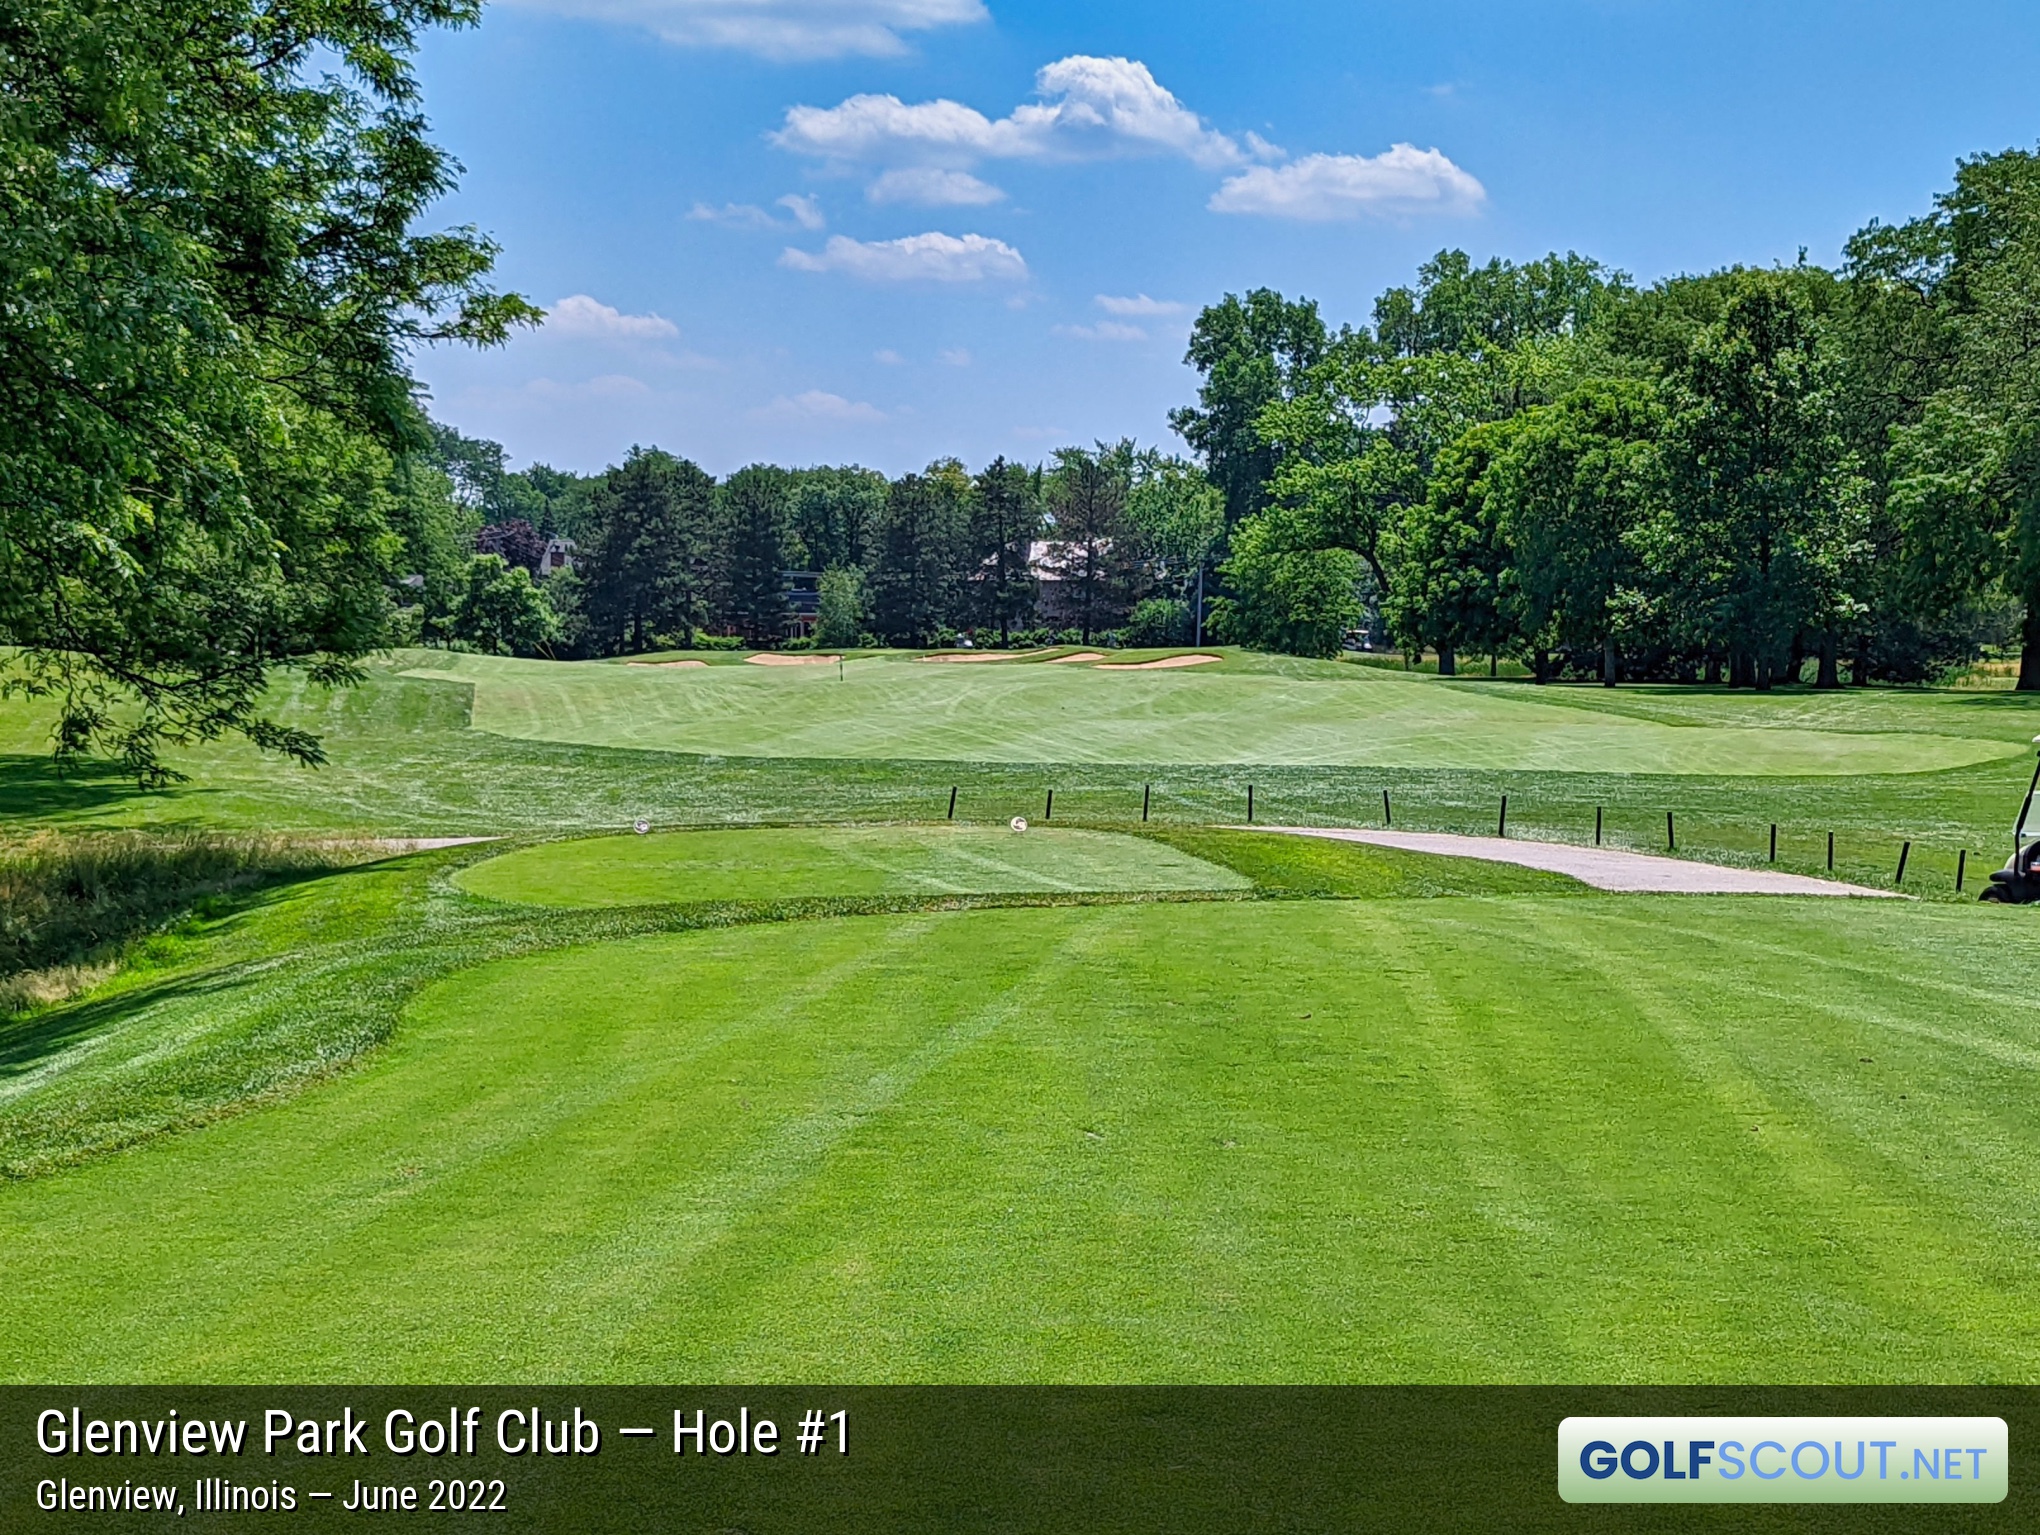 Photo of hole #1 at Glenview Park Golf Club in Glenview, Illinois. 